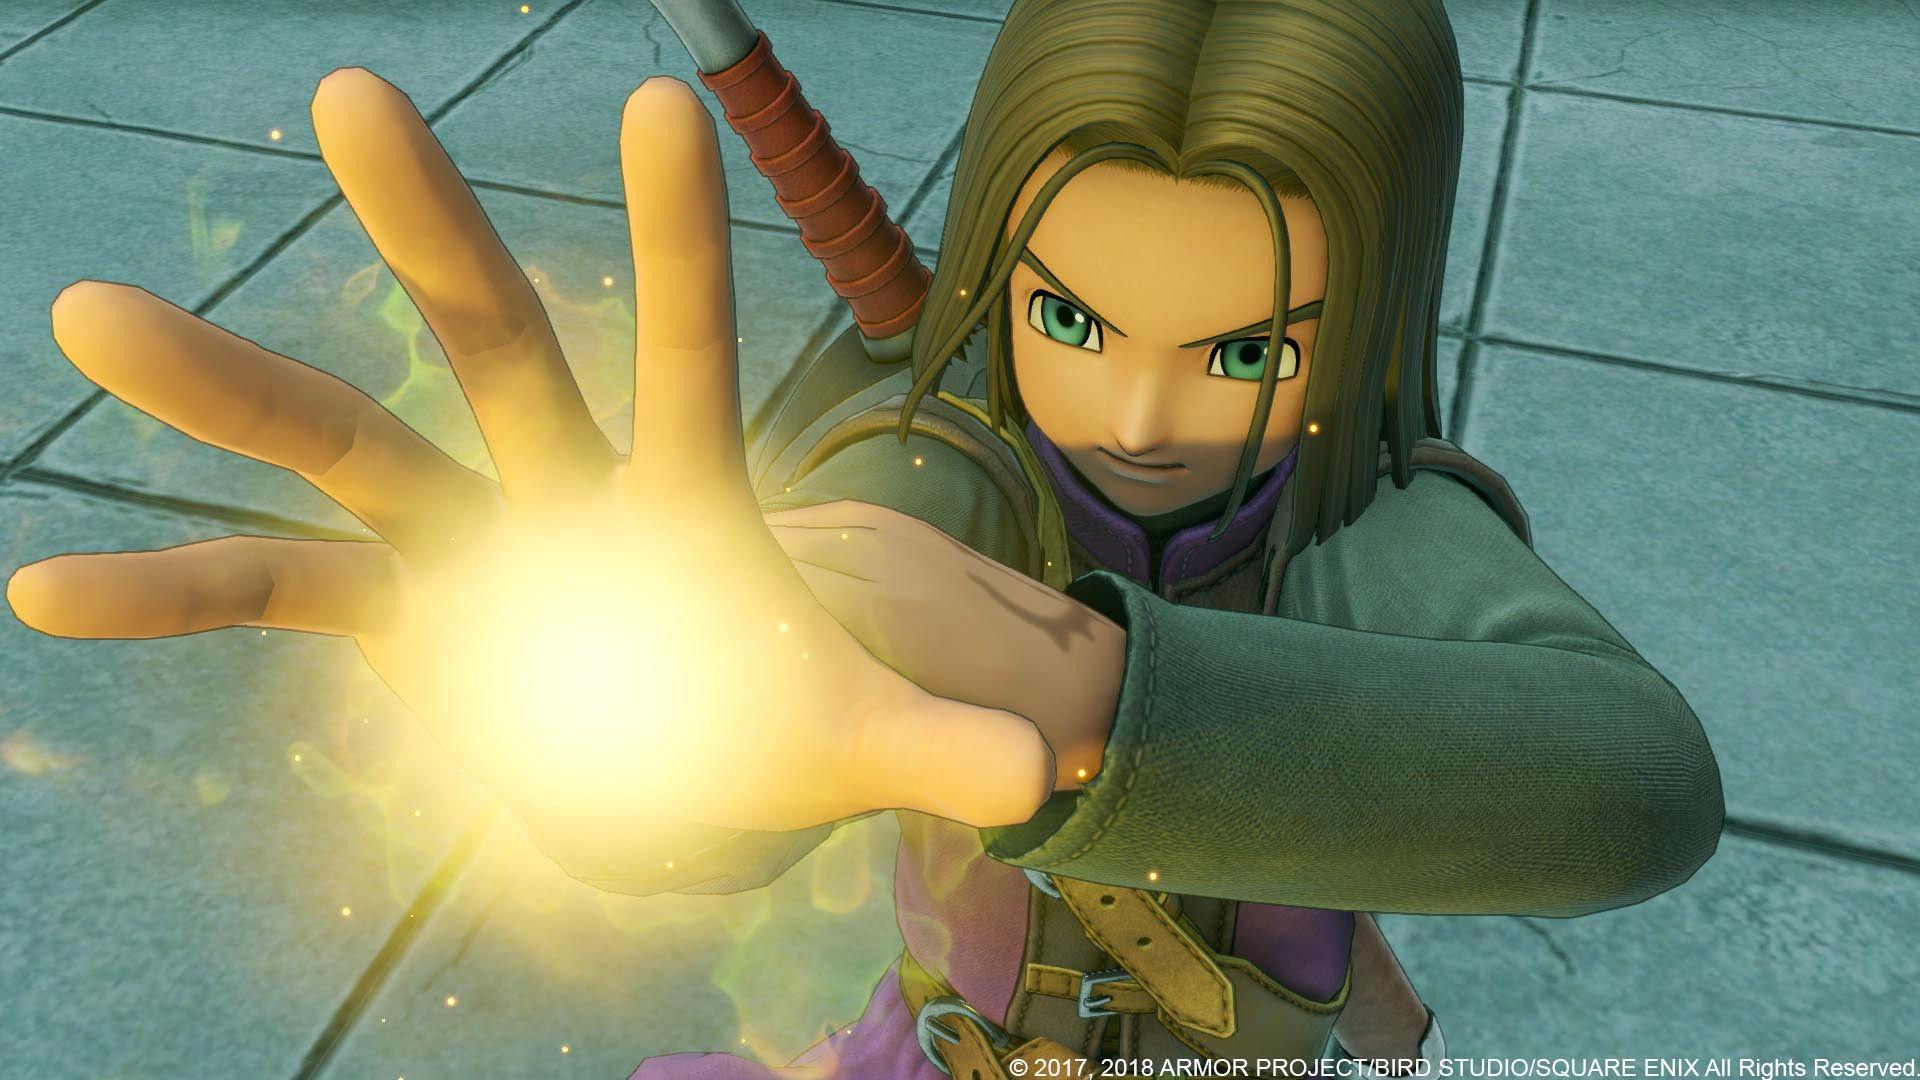 Dragon Quest XI launches on PlayStation 4 and Steam on September 4